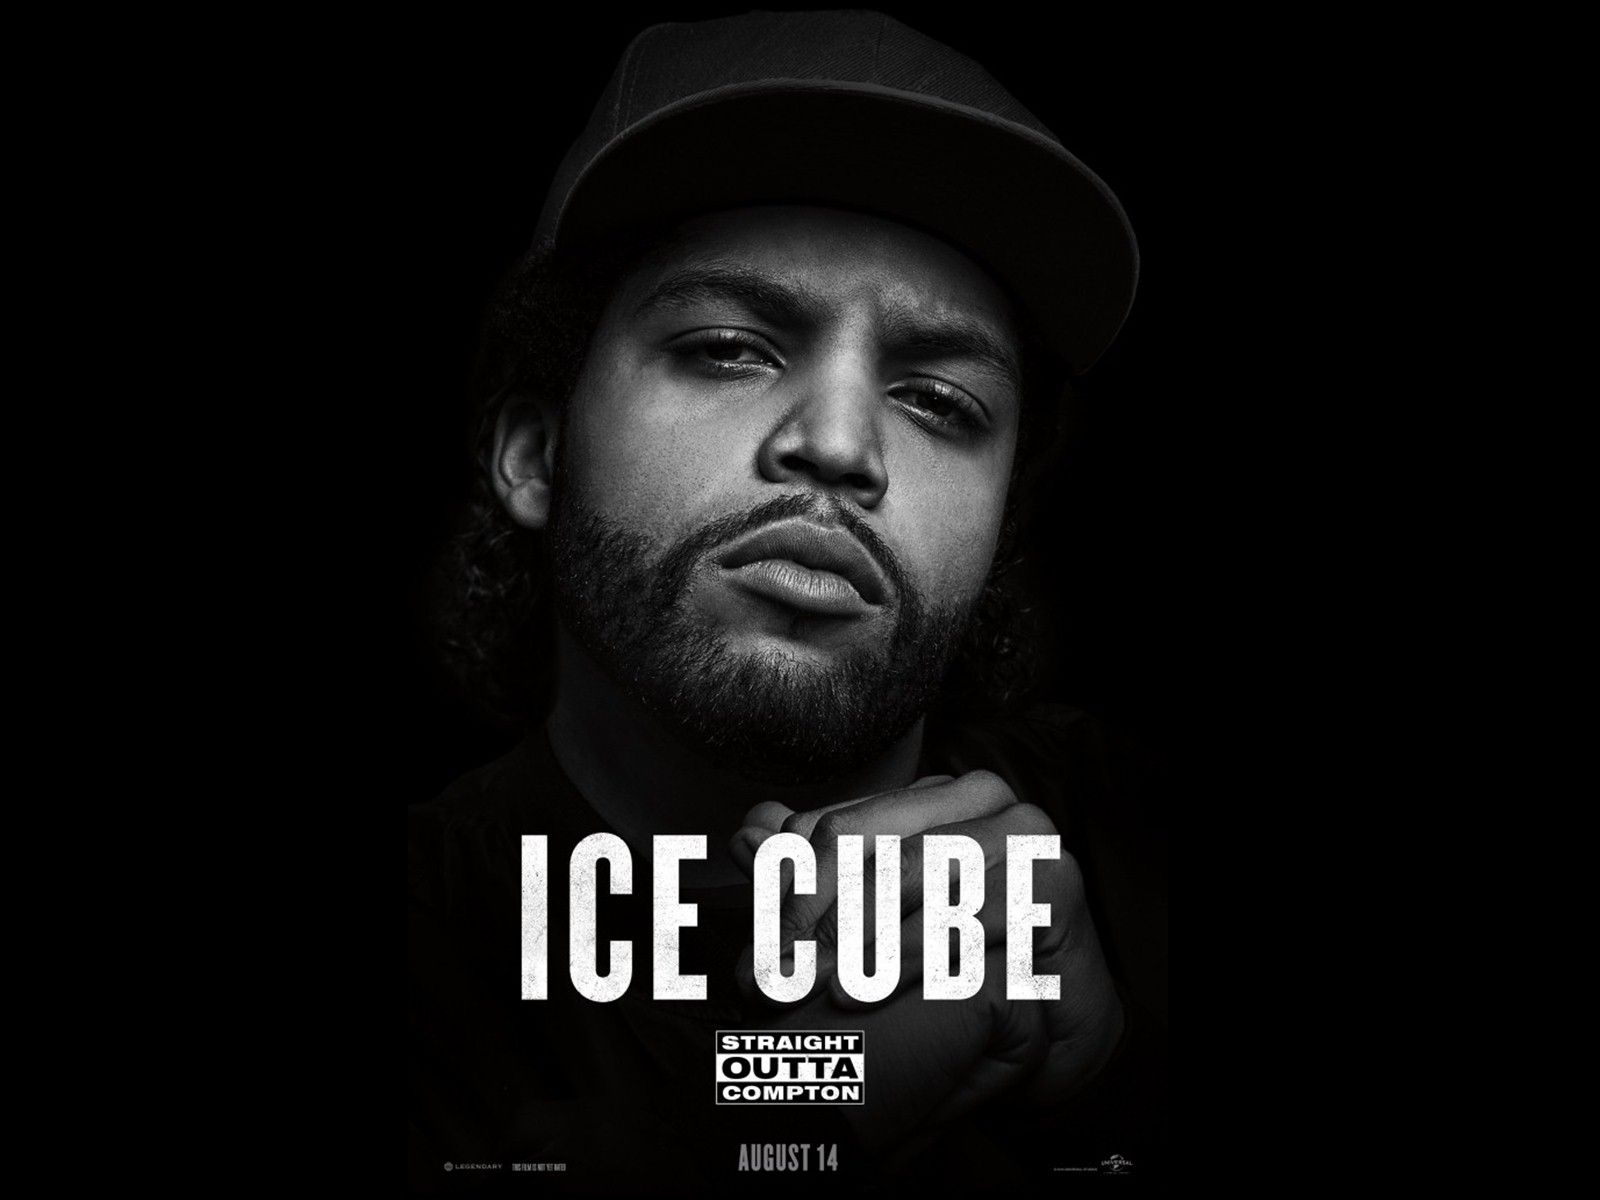 ice cube wallpaper,movie,album cover,poster,text,darkness